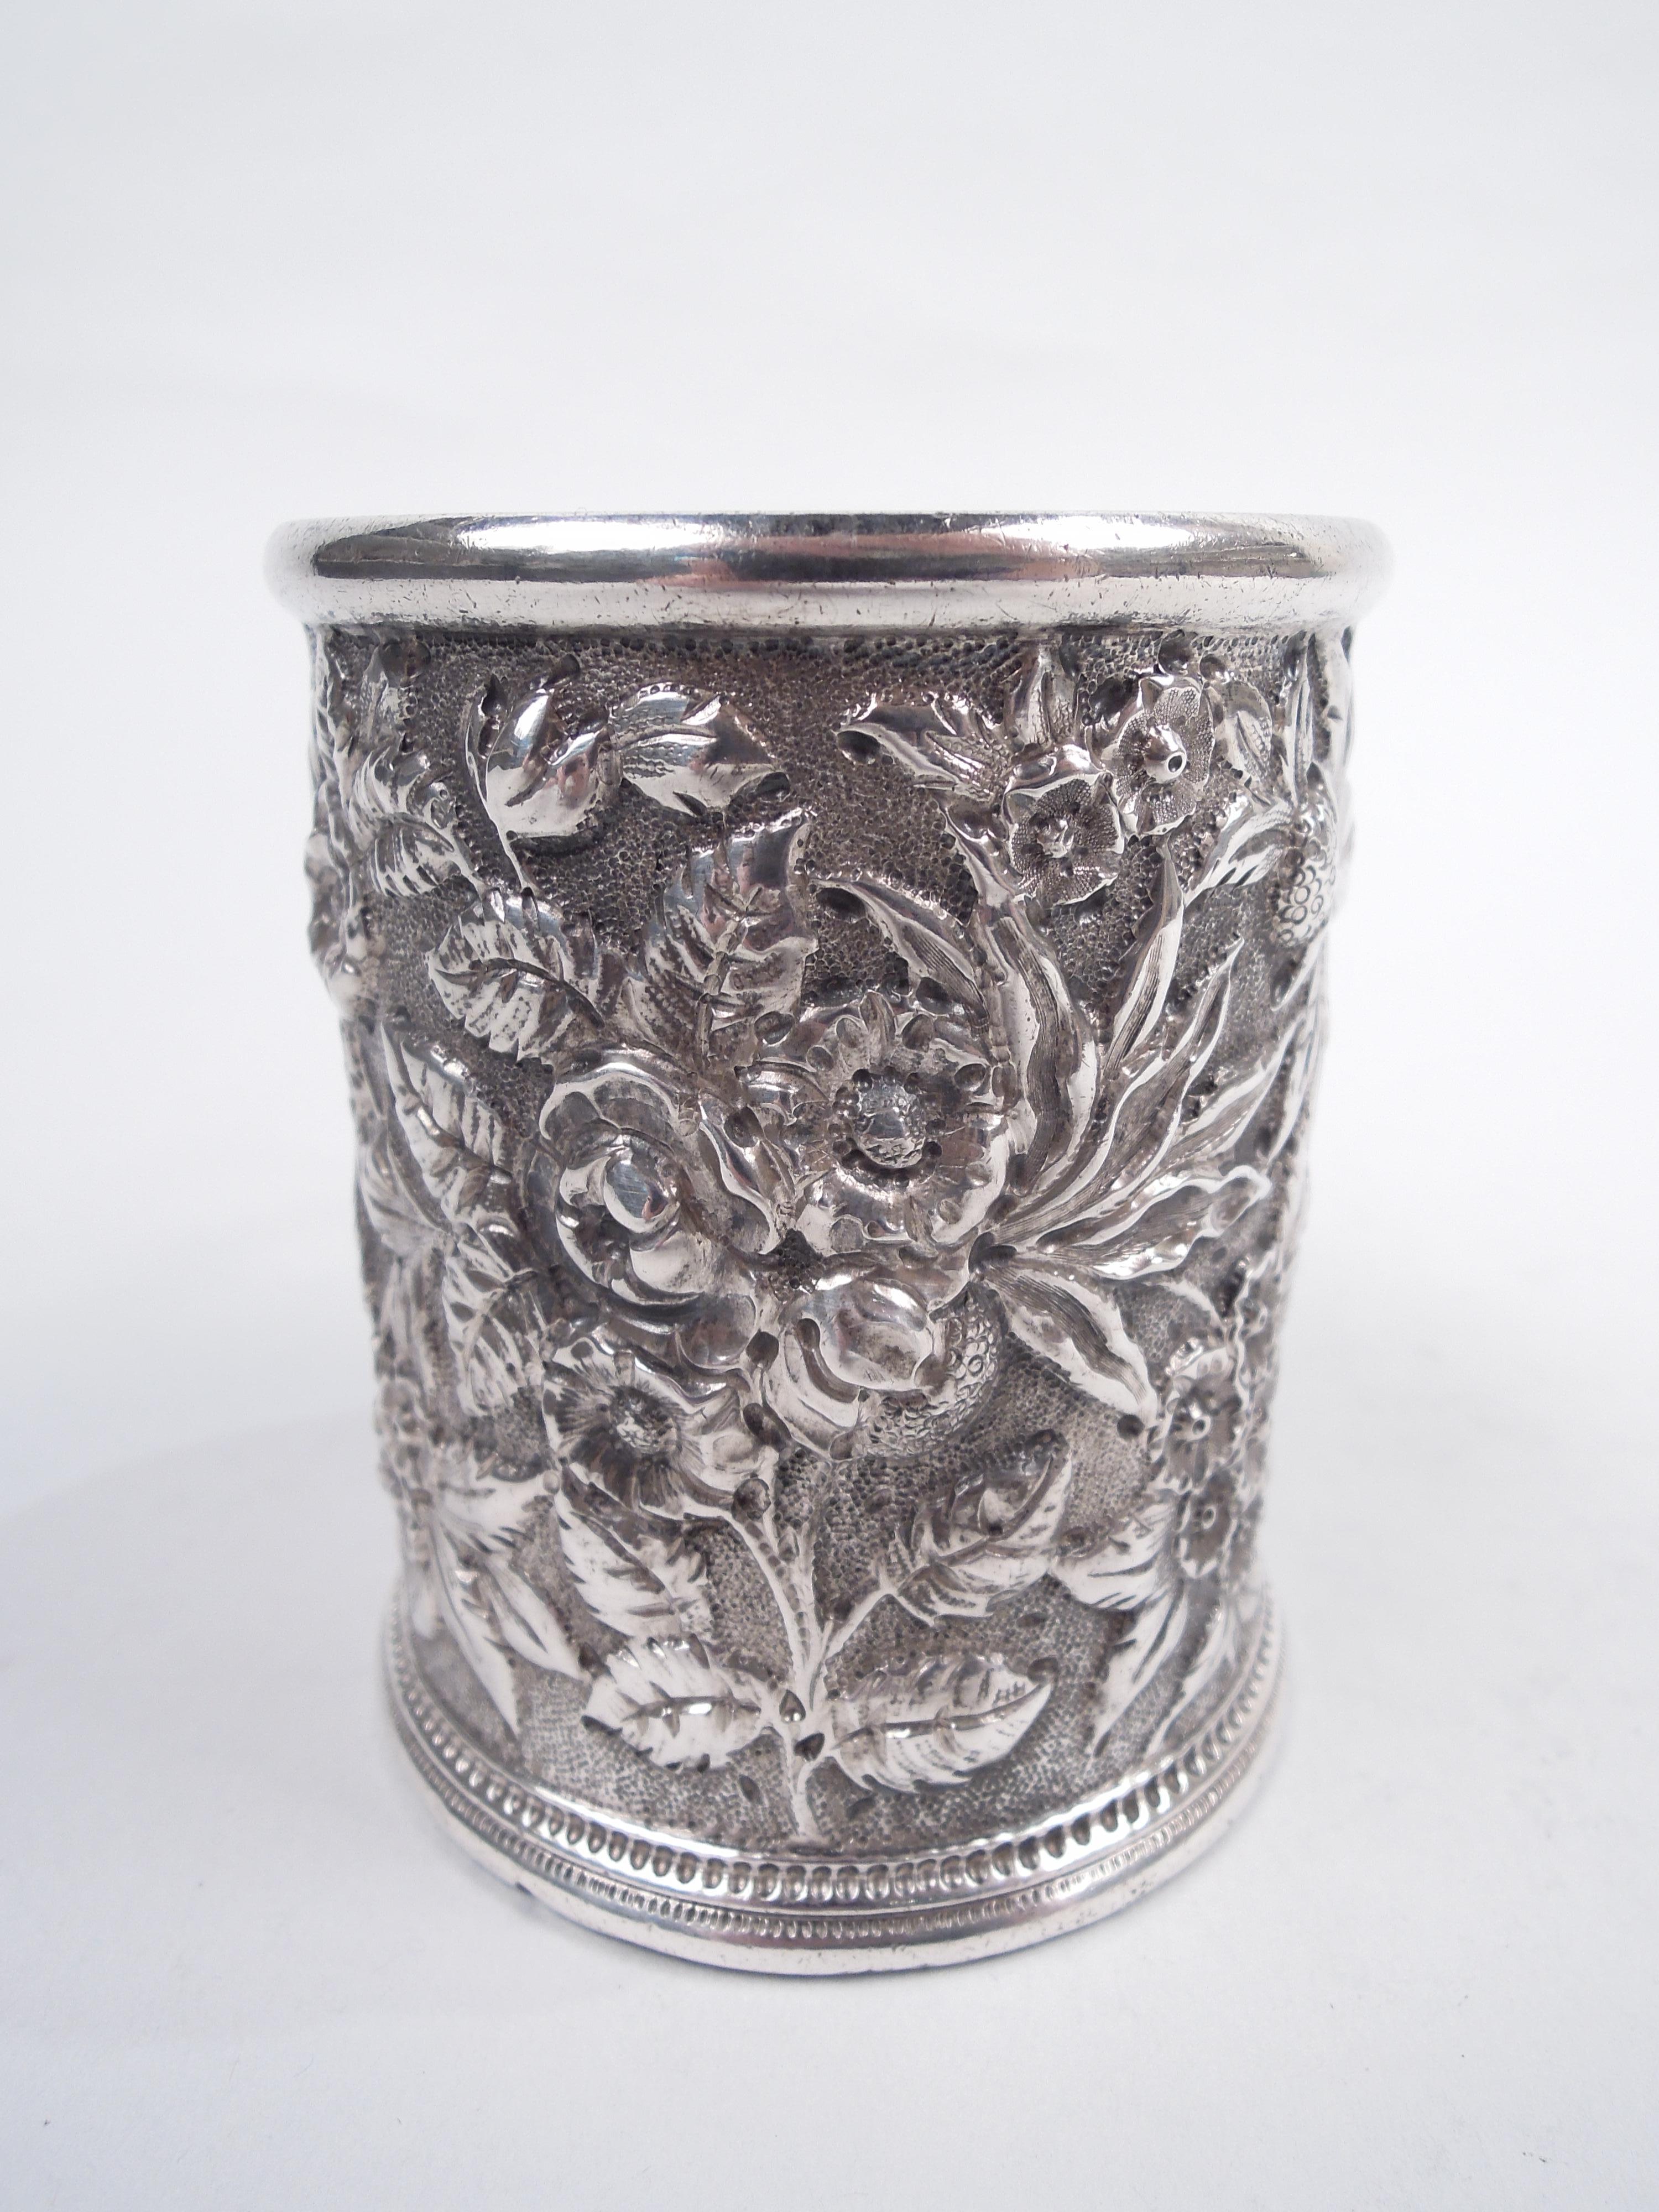 Victorian silver baby cup. Made by S. Kirk & Son in Baltimore. Straight sides with allover floral repousse on stippled ground. Cast and capped leaf scroll handle and pointille foot border. Fully marked including maker’s stamp (1846-61) and alloy “11